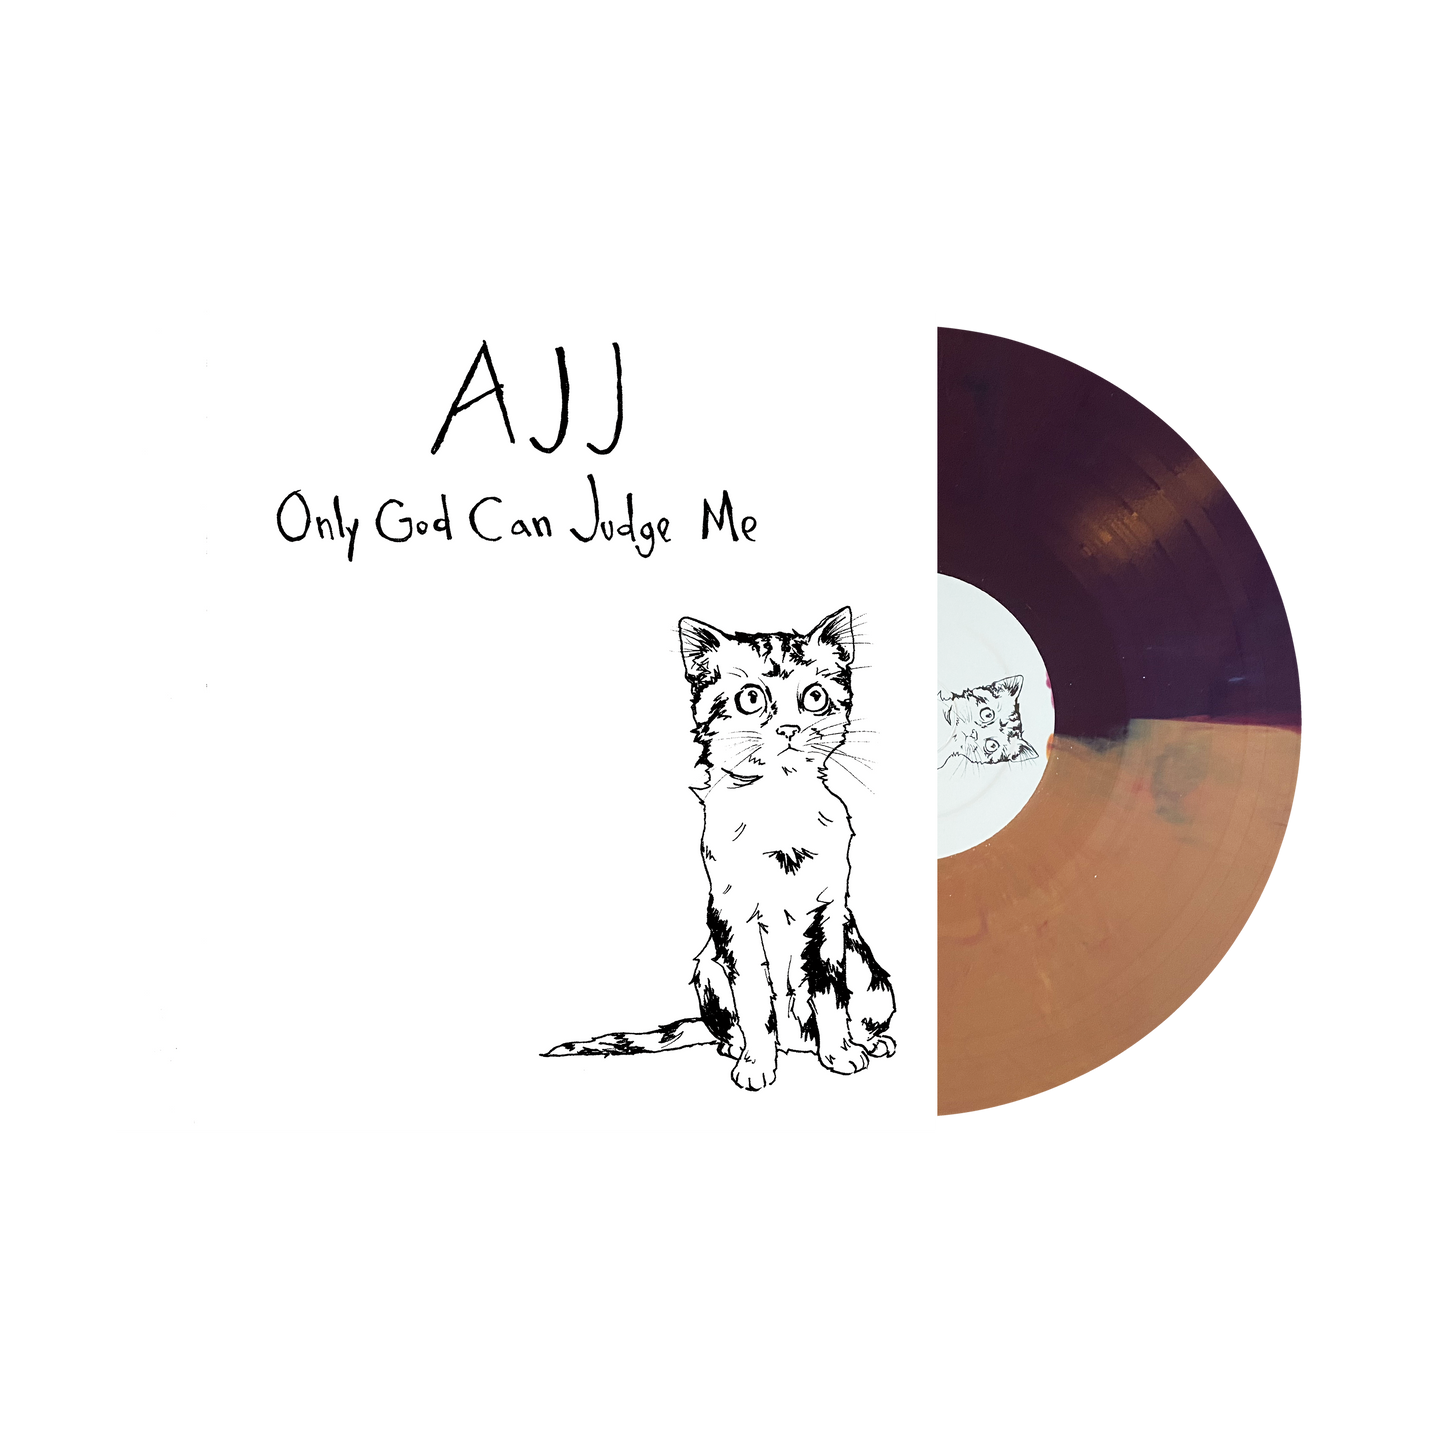 AJJ "Only God Can Judge Me" LP